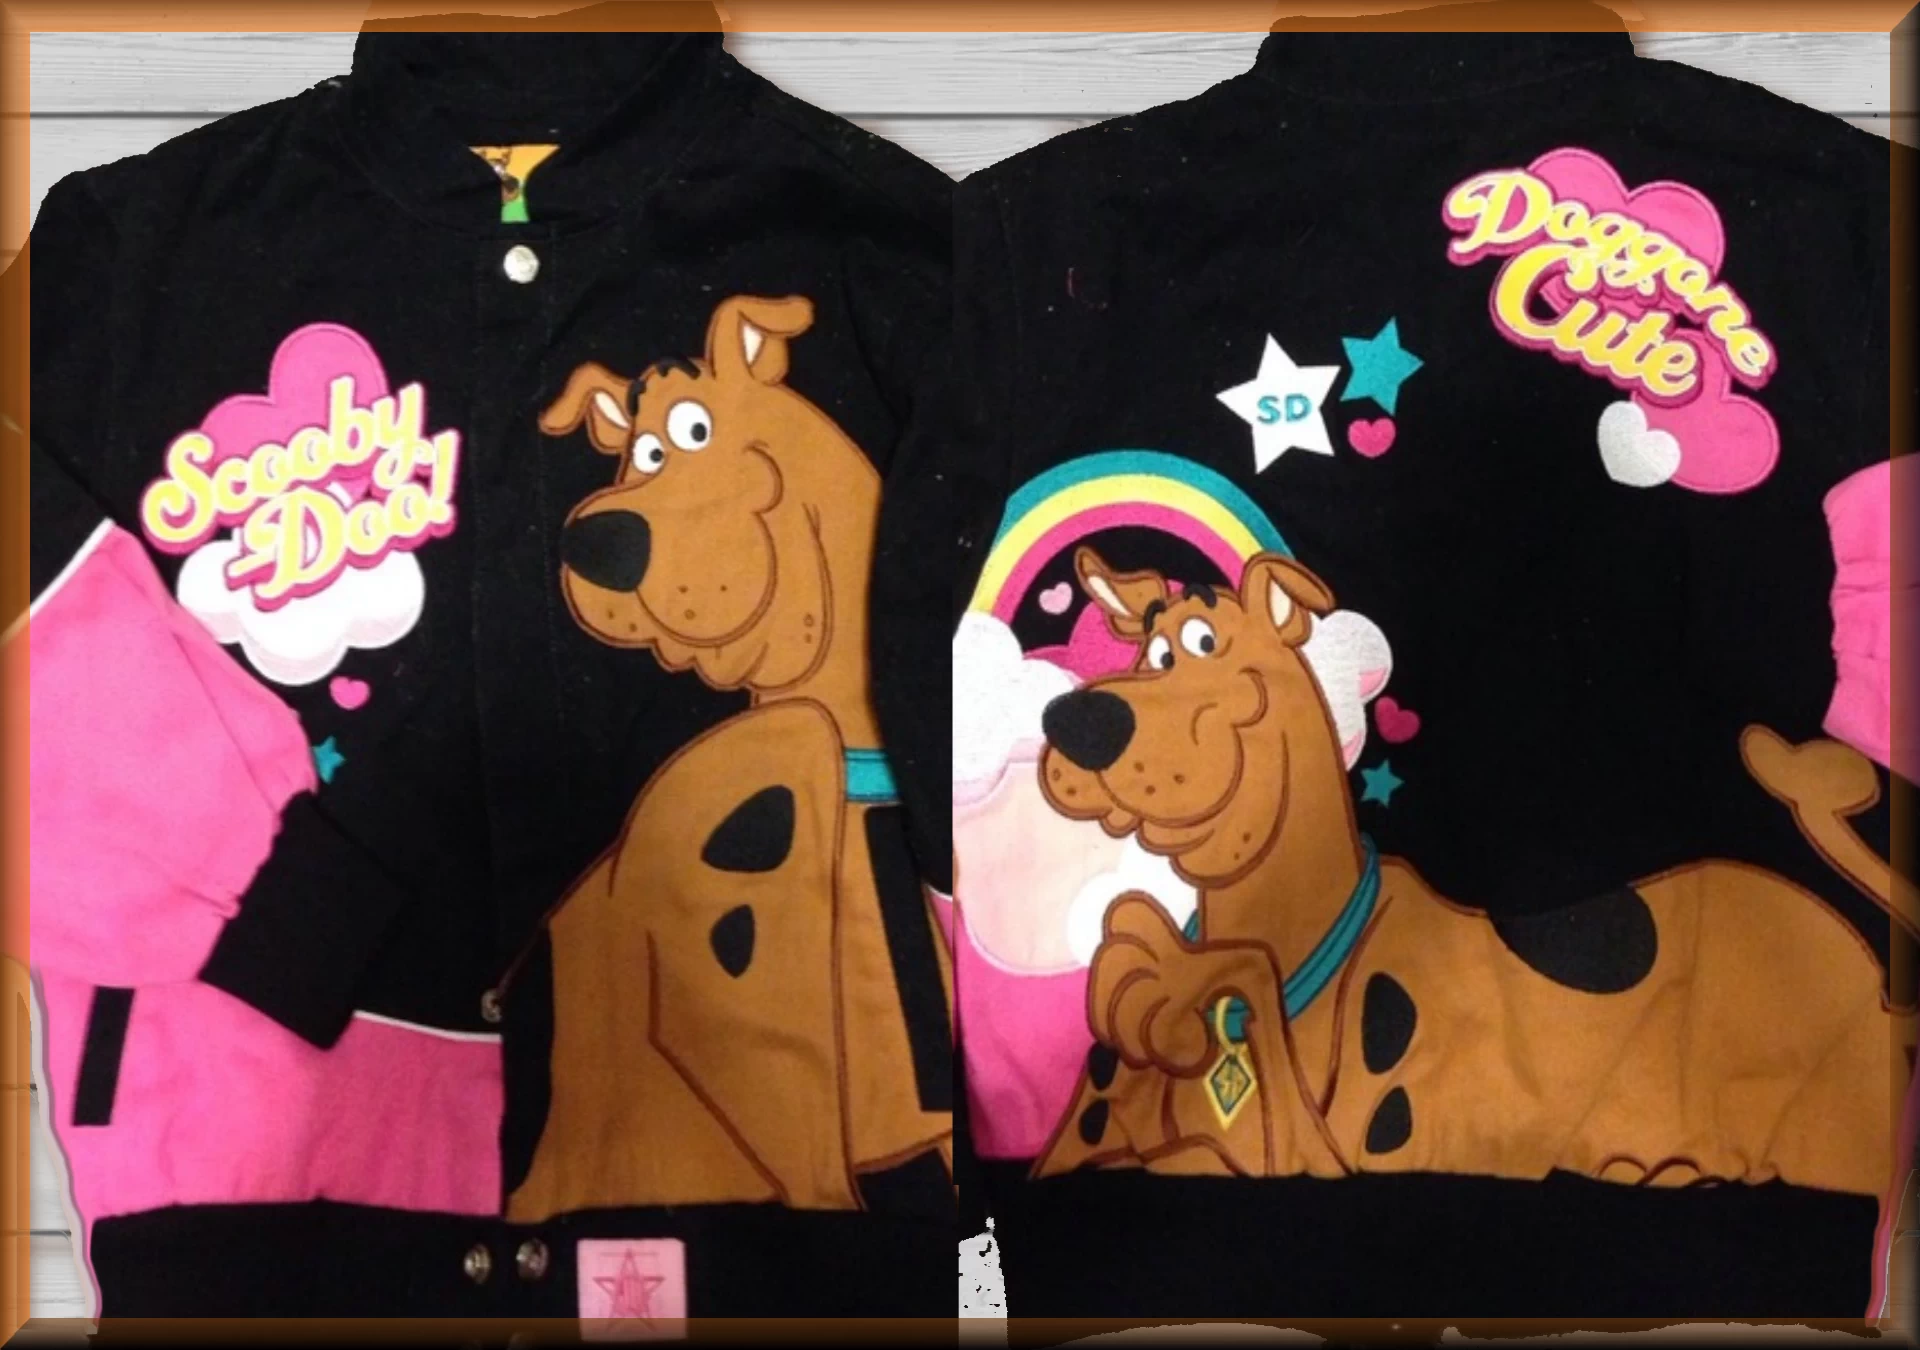 Scooby Doo Doggone Cute Kids Character Jacket by JH Design